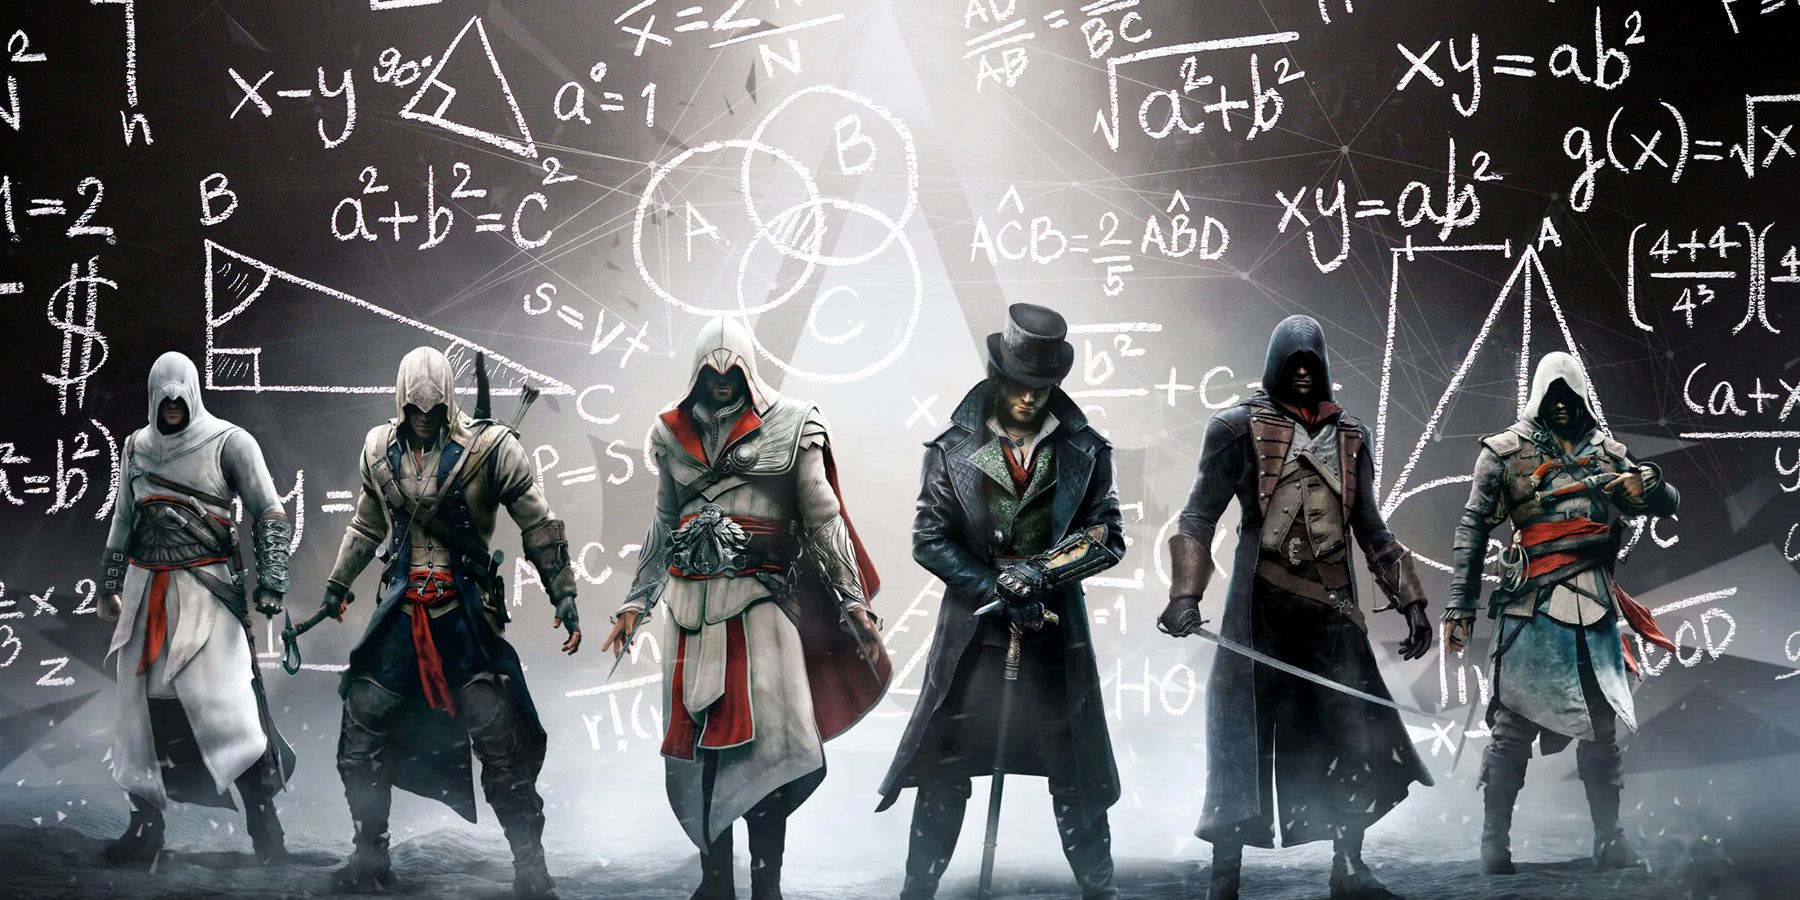 complicated-assassins-creed-timeline-game-rant-2